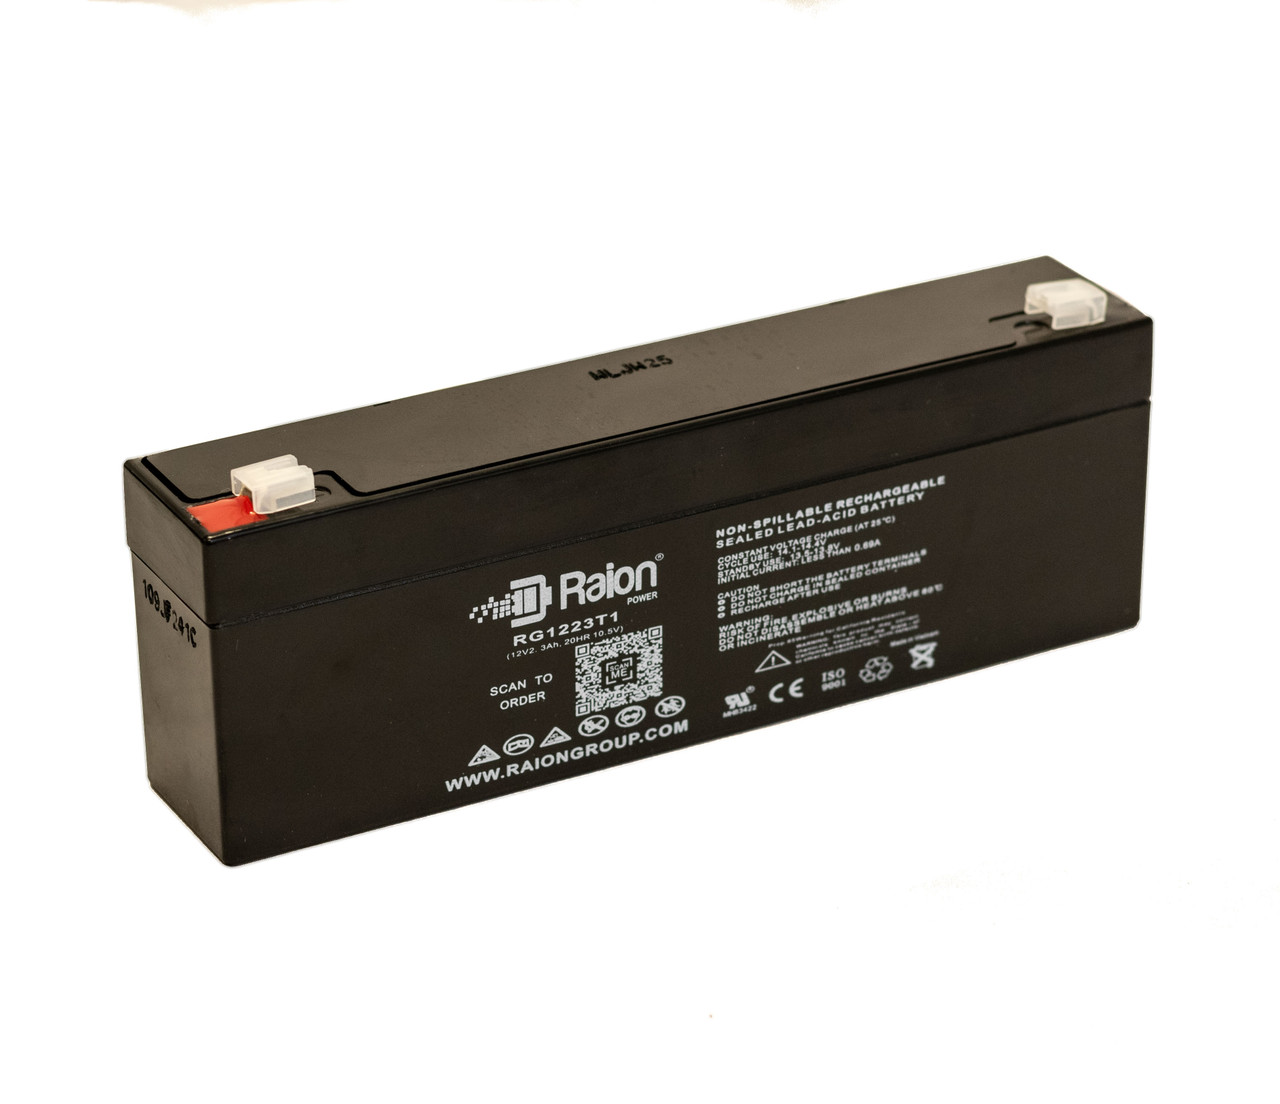 Raion Power RG1223T1 Replacement Battery for Kontron 400